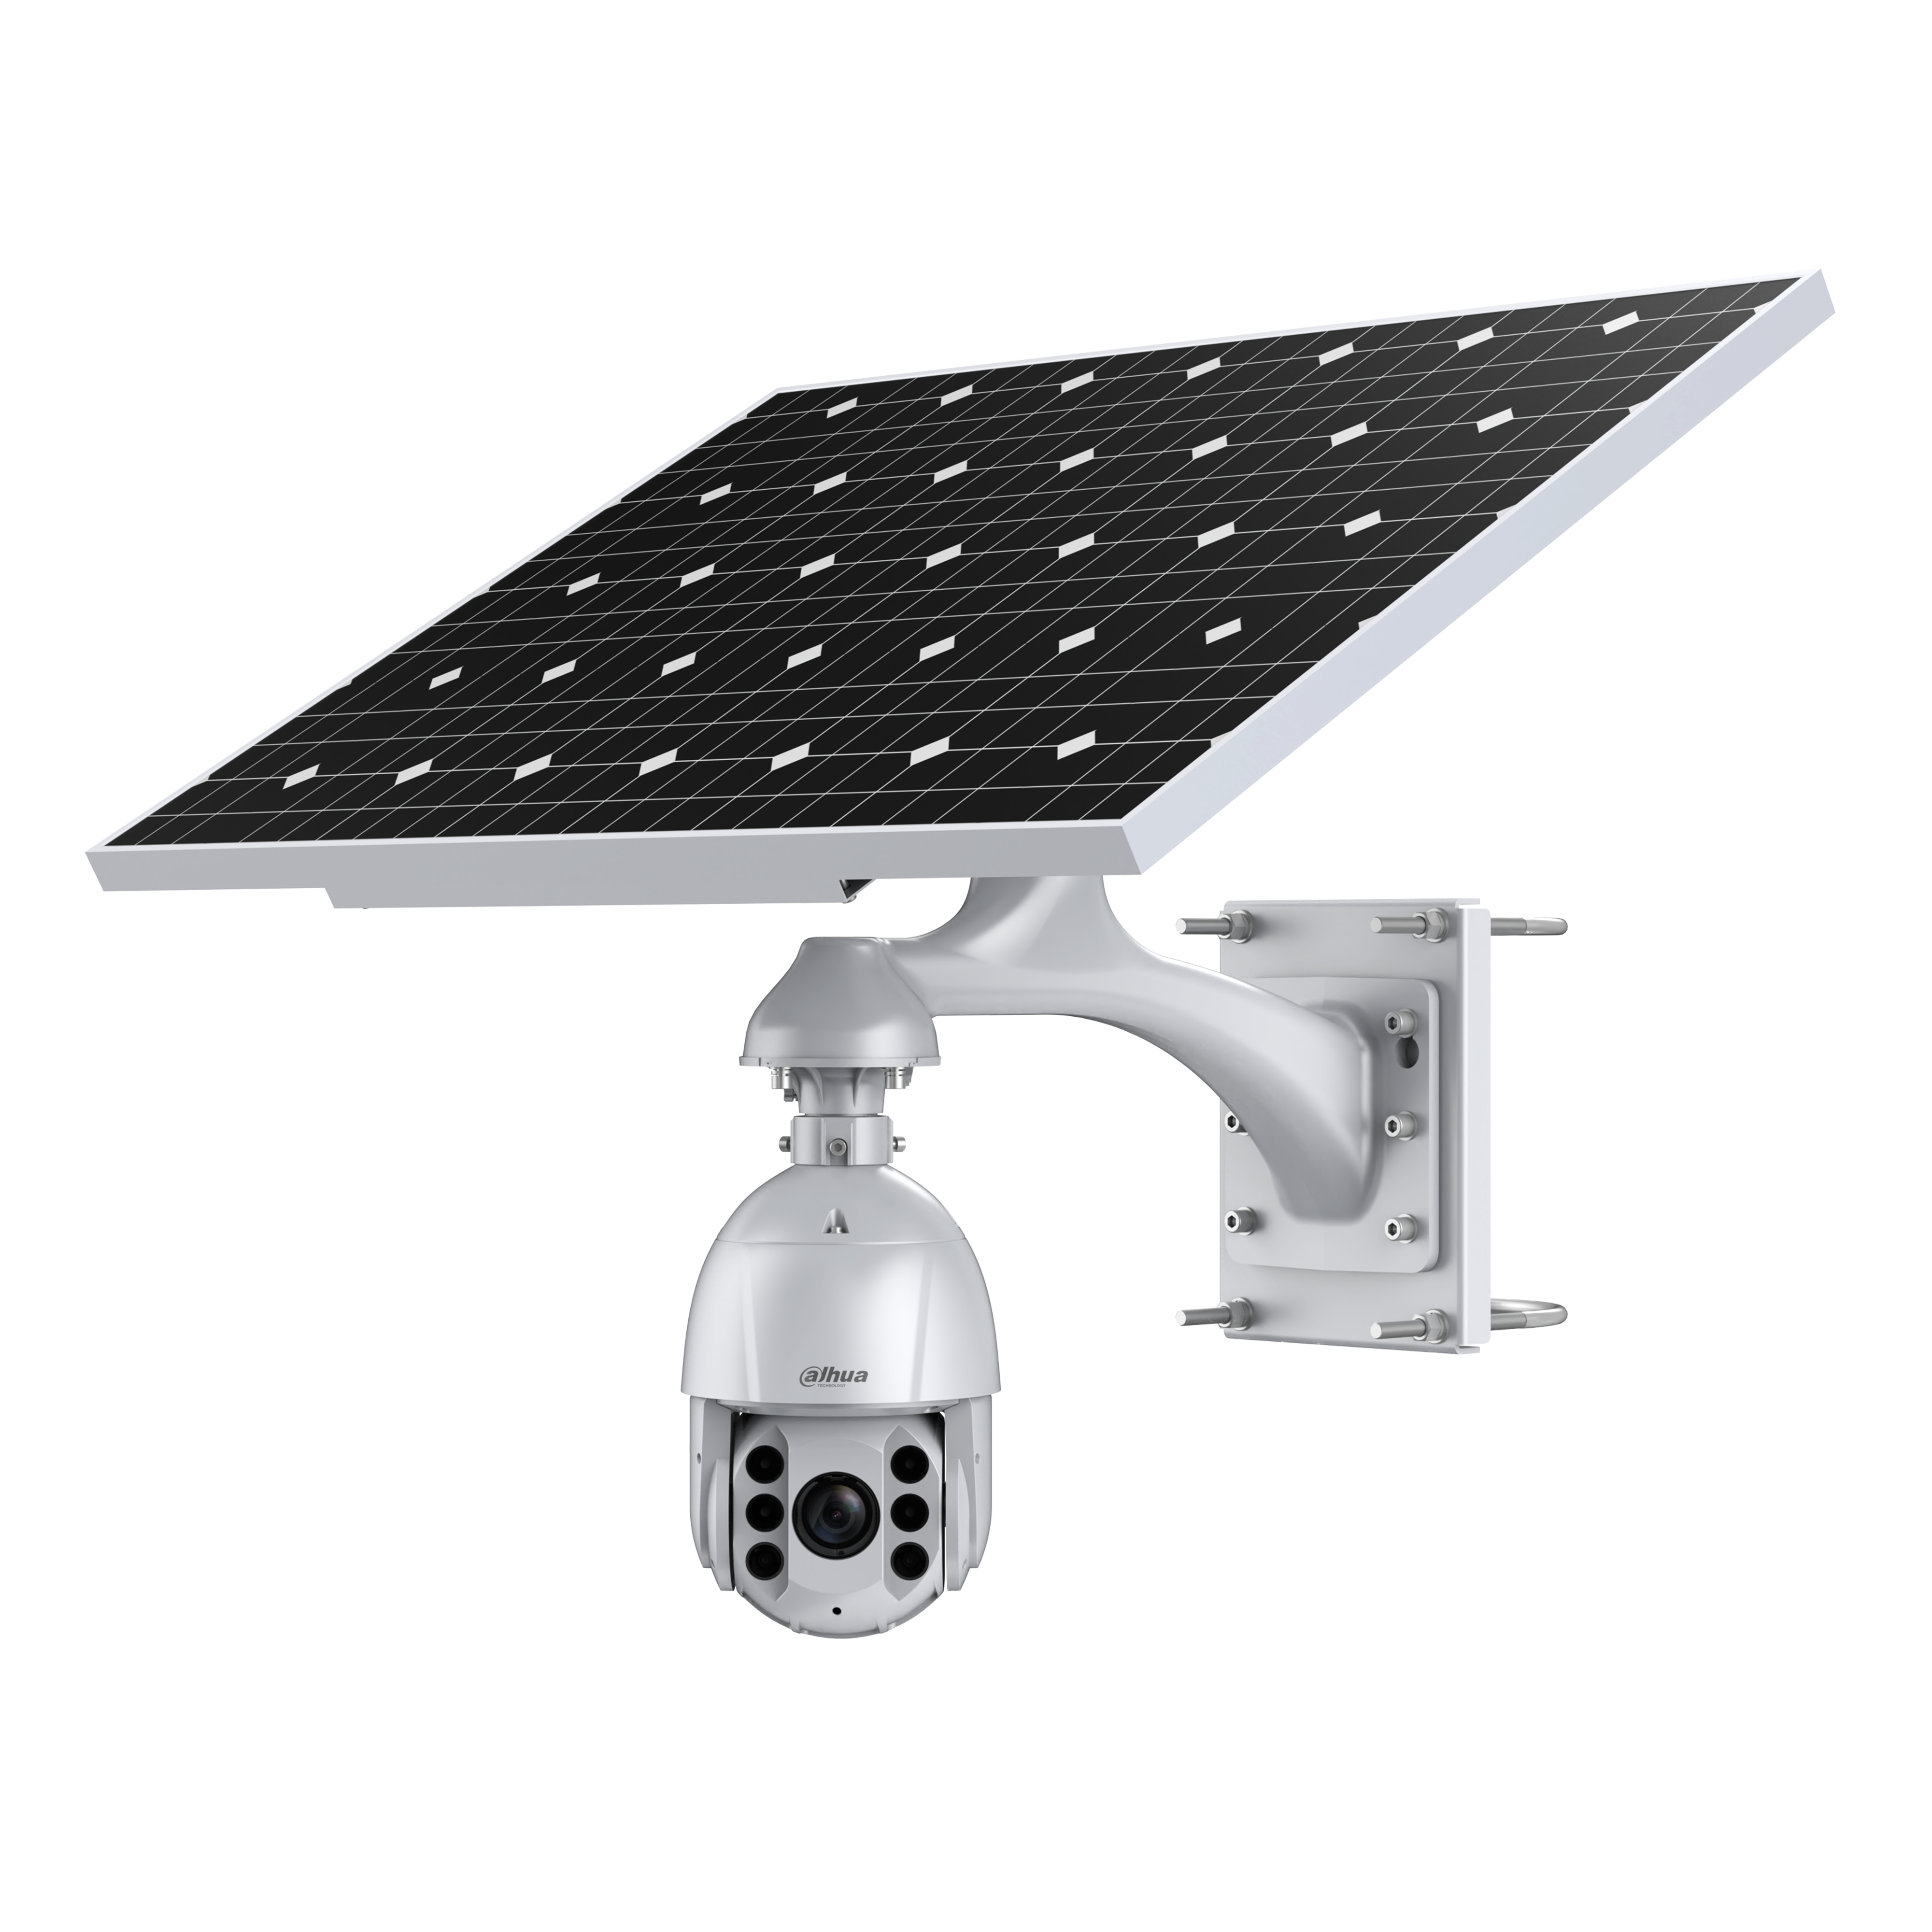 DAHUA KIT/DH-PFM378-B125-CB/DH-SD6C3432XB-HNR-AGQ-PV/DH-PFB301C/PFA111 Integrated Solar Monitoring System(Without Lithium Battery)